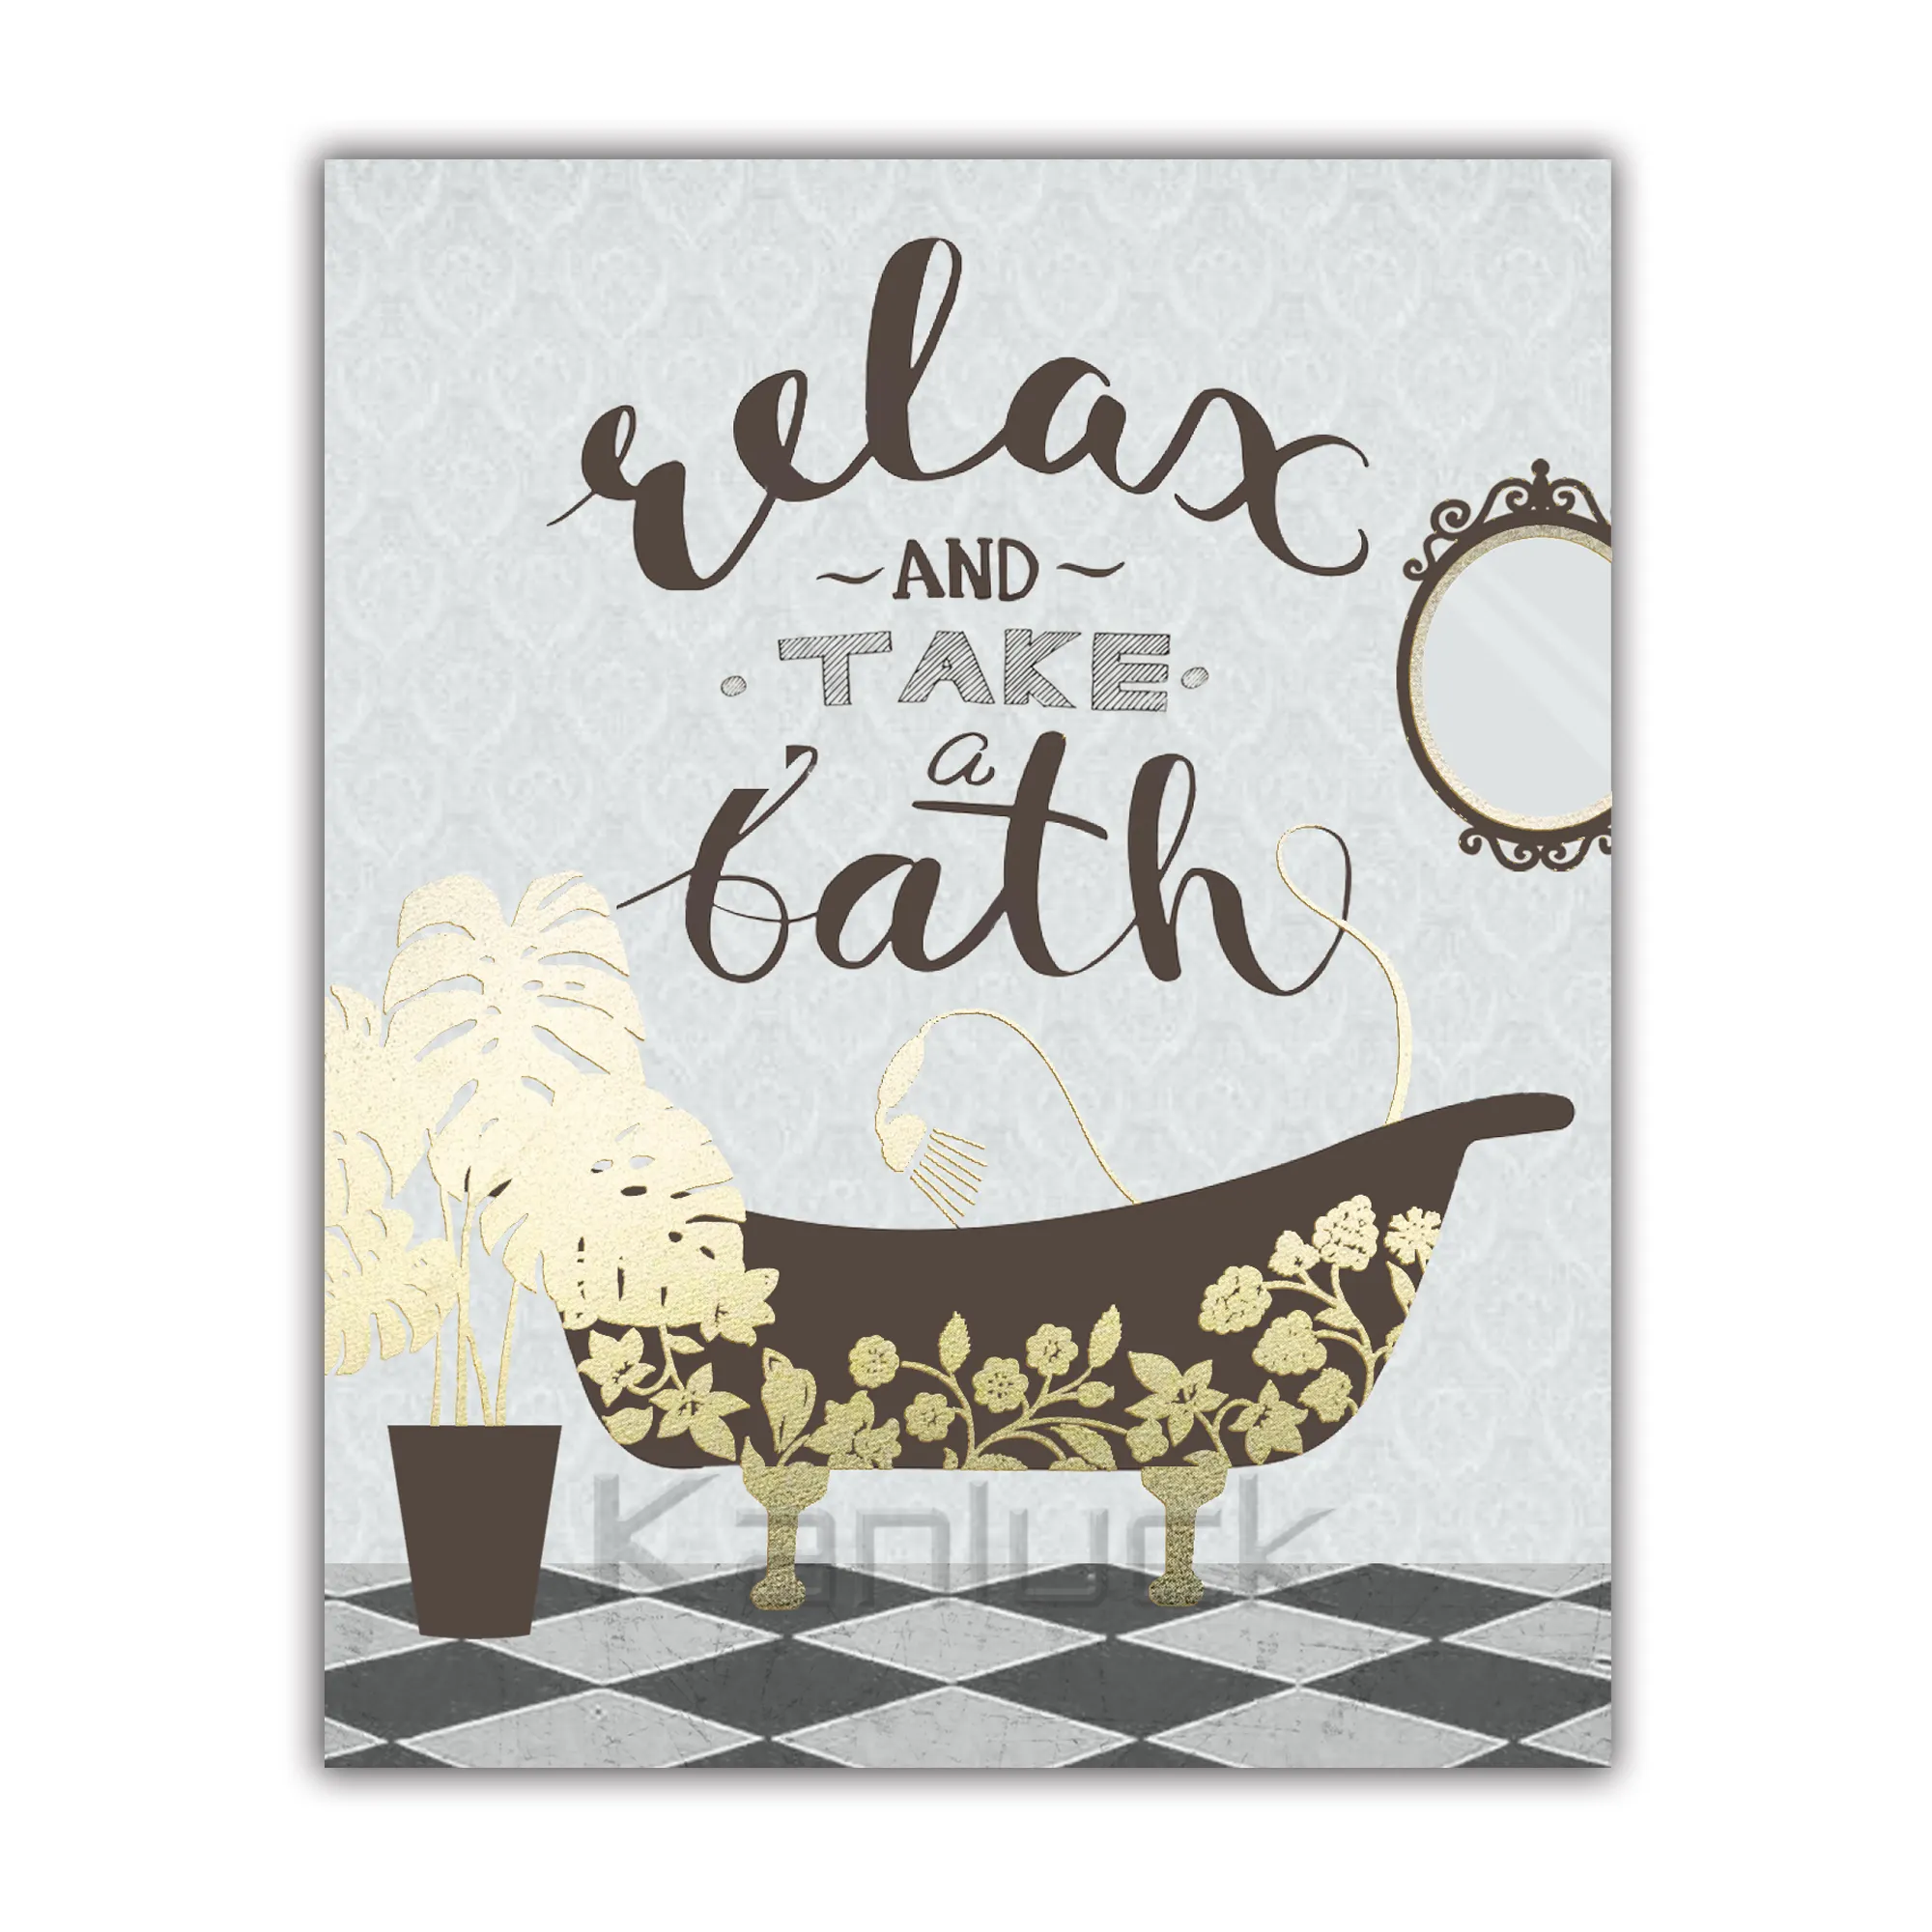 "Relax and Take Bath" Embellished Canvas Painting Art with Gold Foil for Bath Room Home Decor